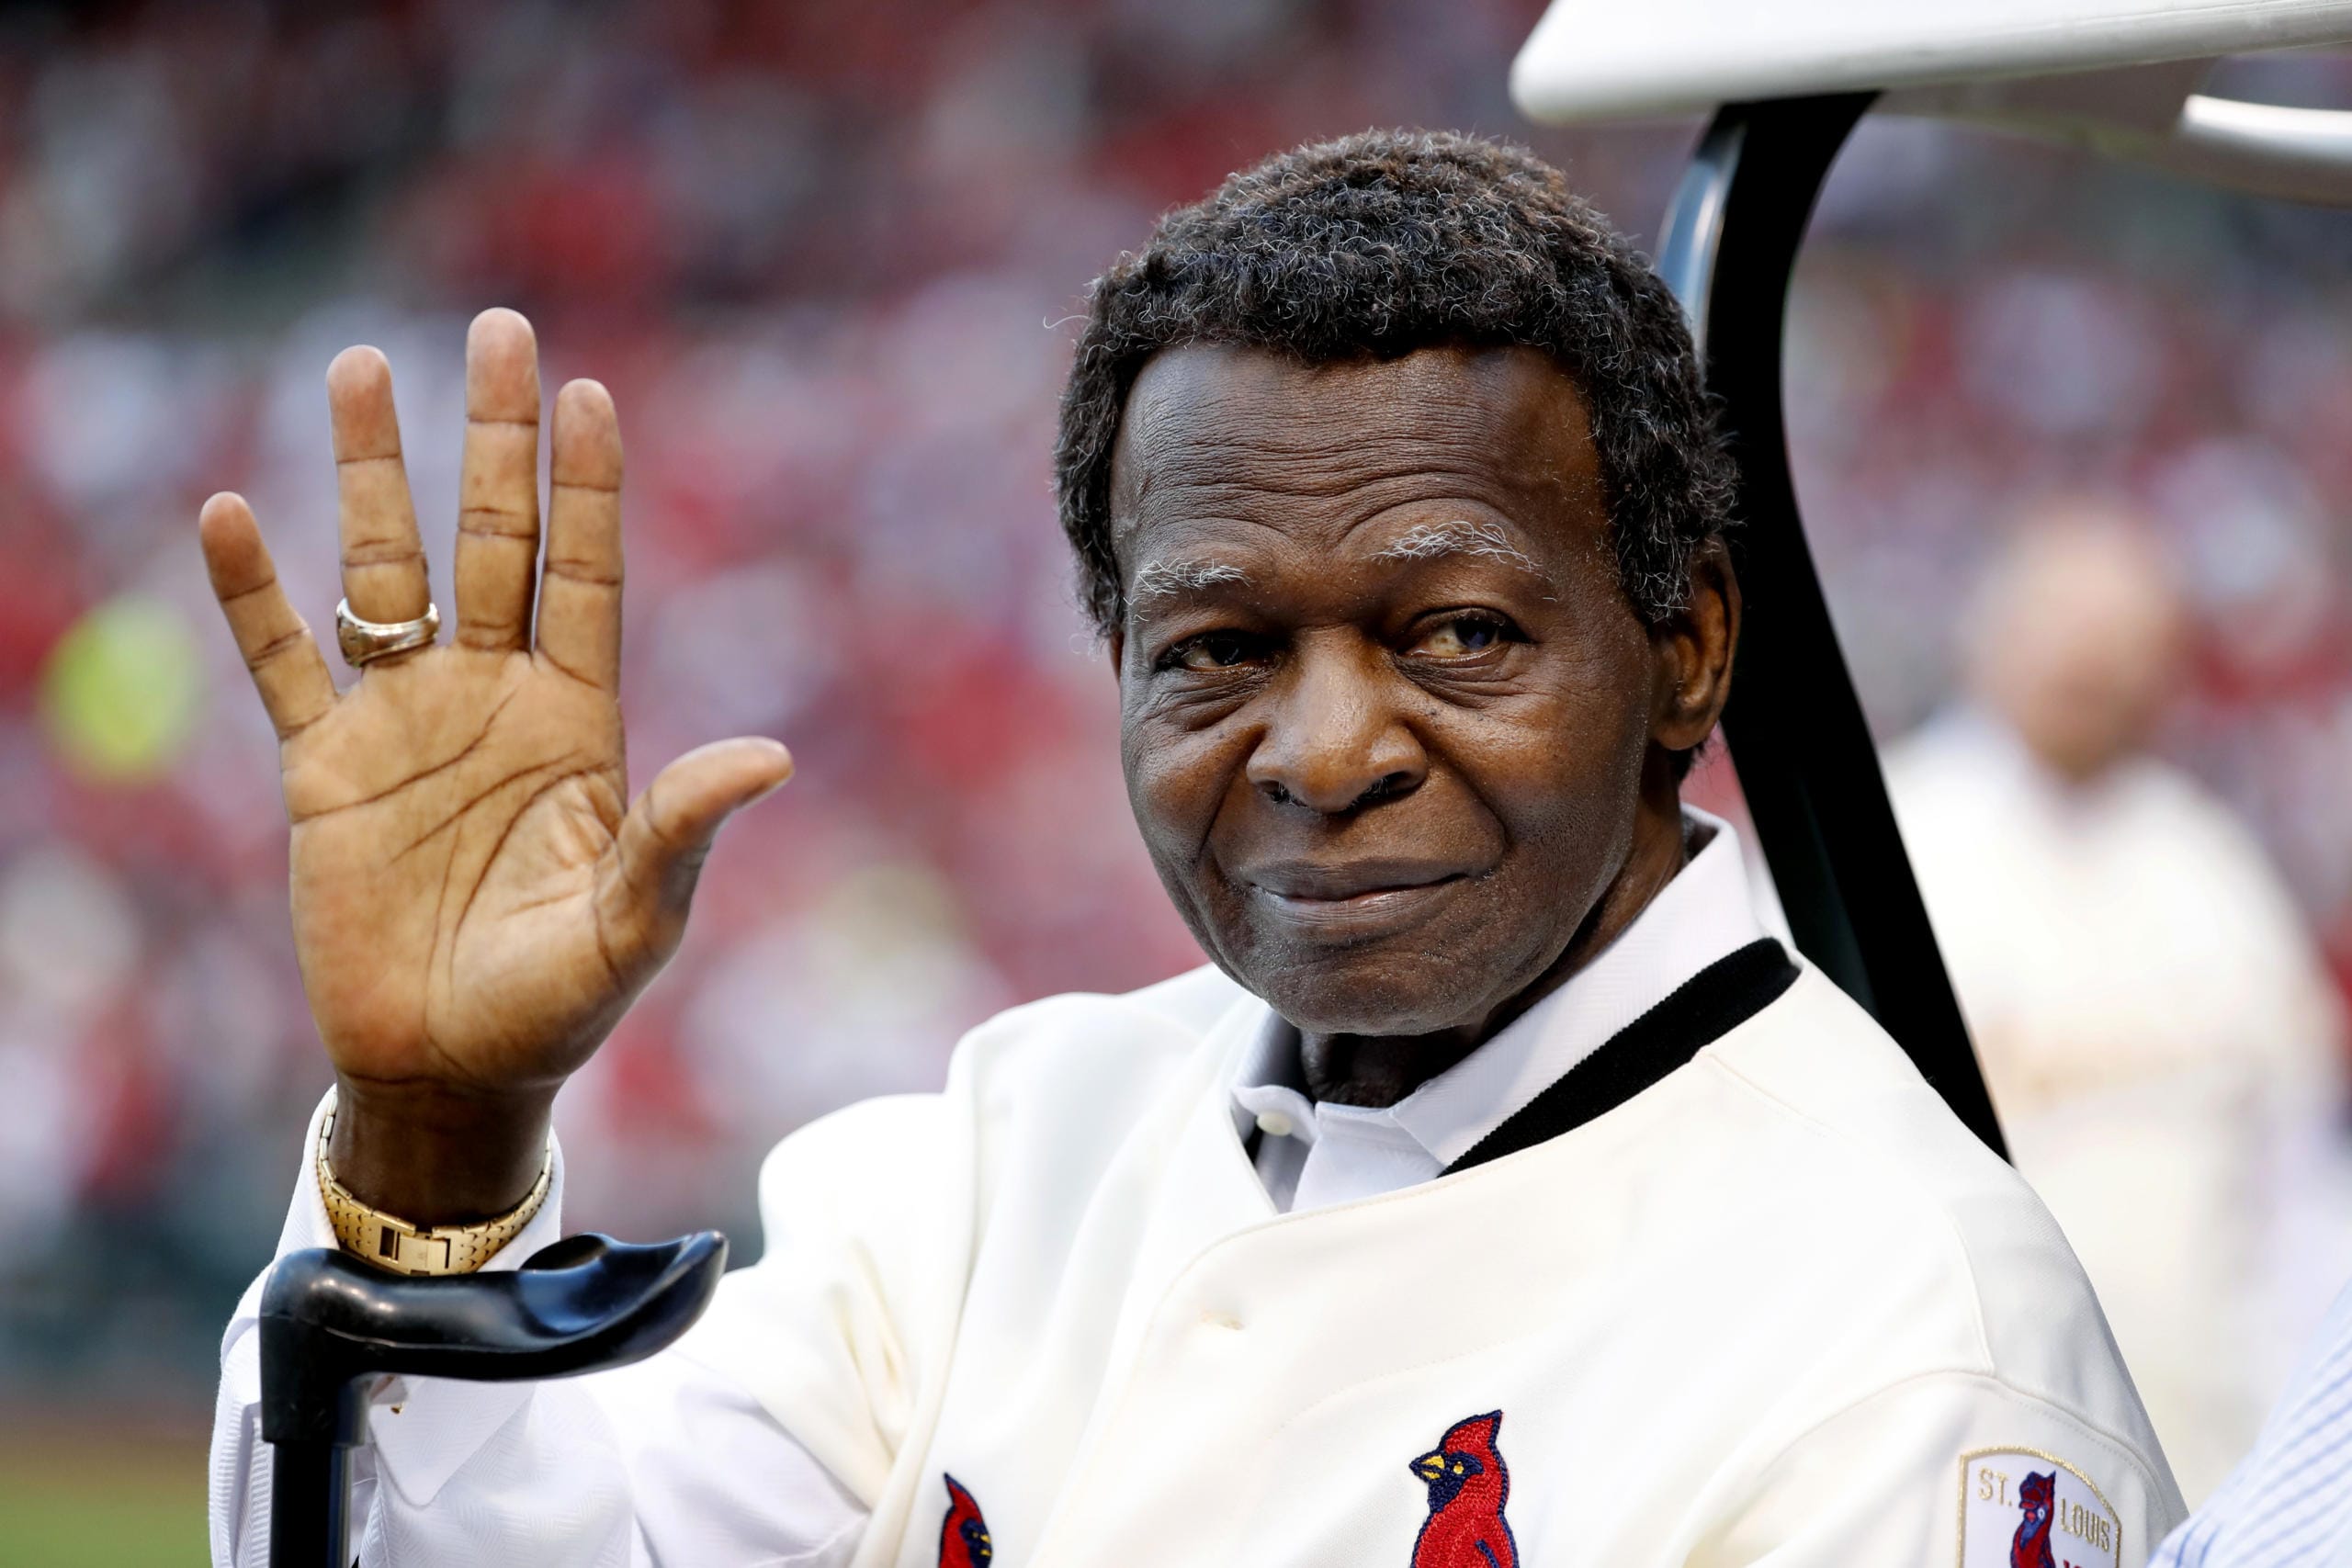 FILE - In this May 17, 2017, file photo, Lou Brock, a member of the St. Louis Cardinals' 1967 World Series championship team, takes part in a ceremony honoring the 50th anniversary of the victory before a baseball game between the Cardinals and the Boston Red Sox in St. Louis. Hall of Famer Brock, one of baseball’s signature leadoff hitters and base stealers who helped the Cardinals win three pennants and two World Series titles in the 1960s, has died. He was 81.